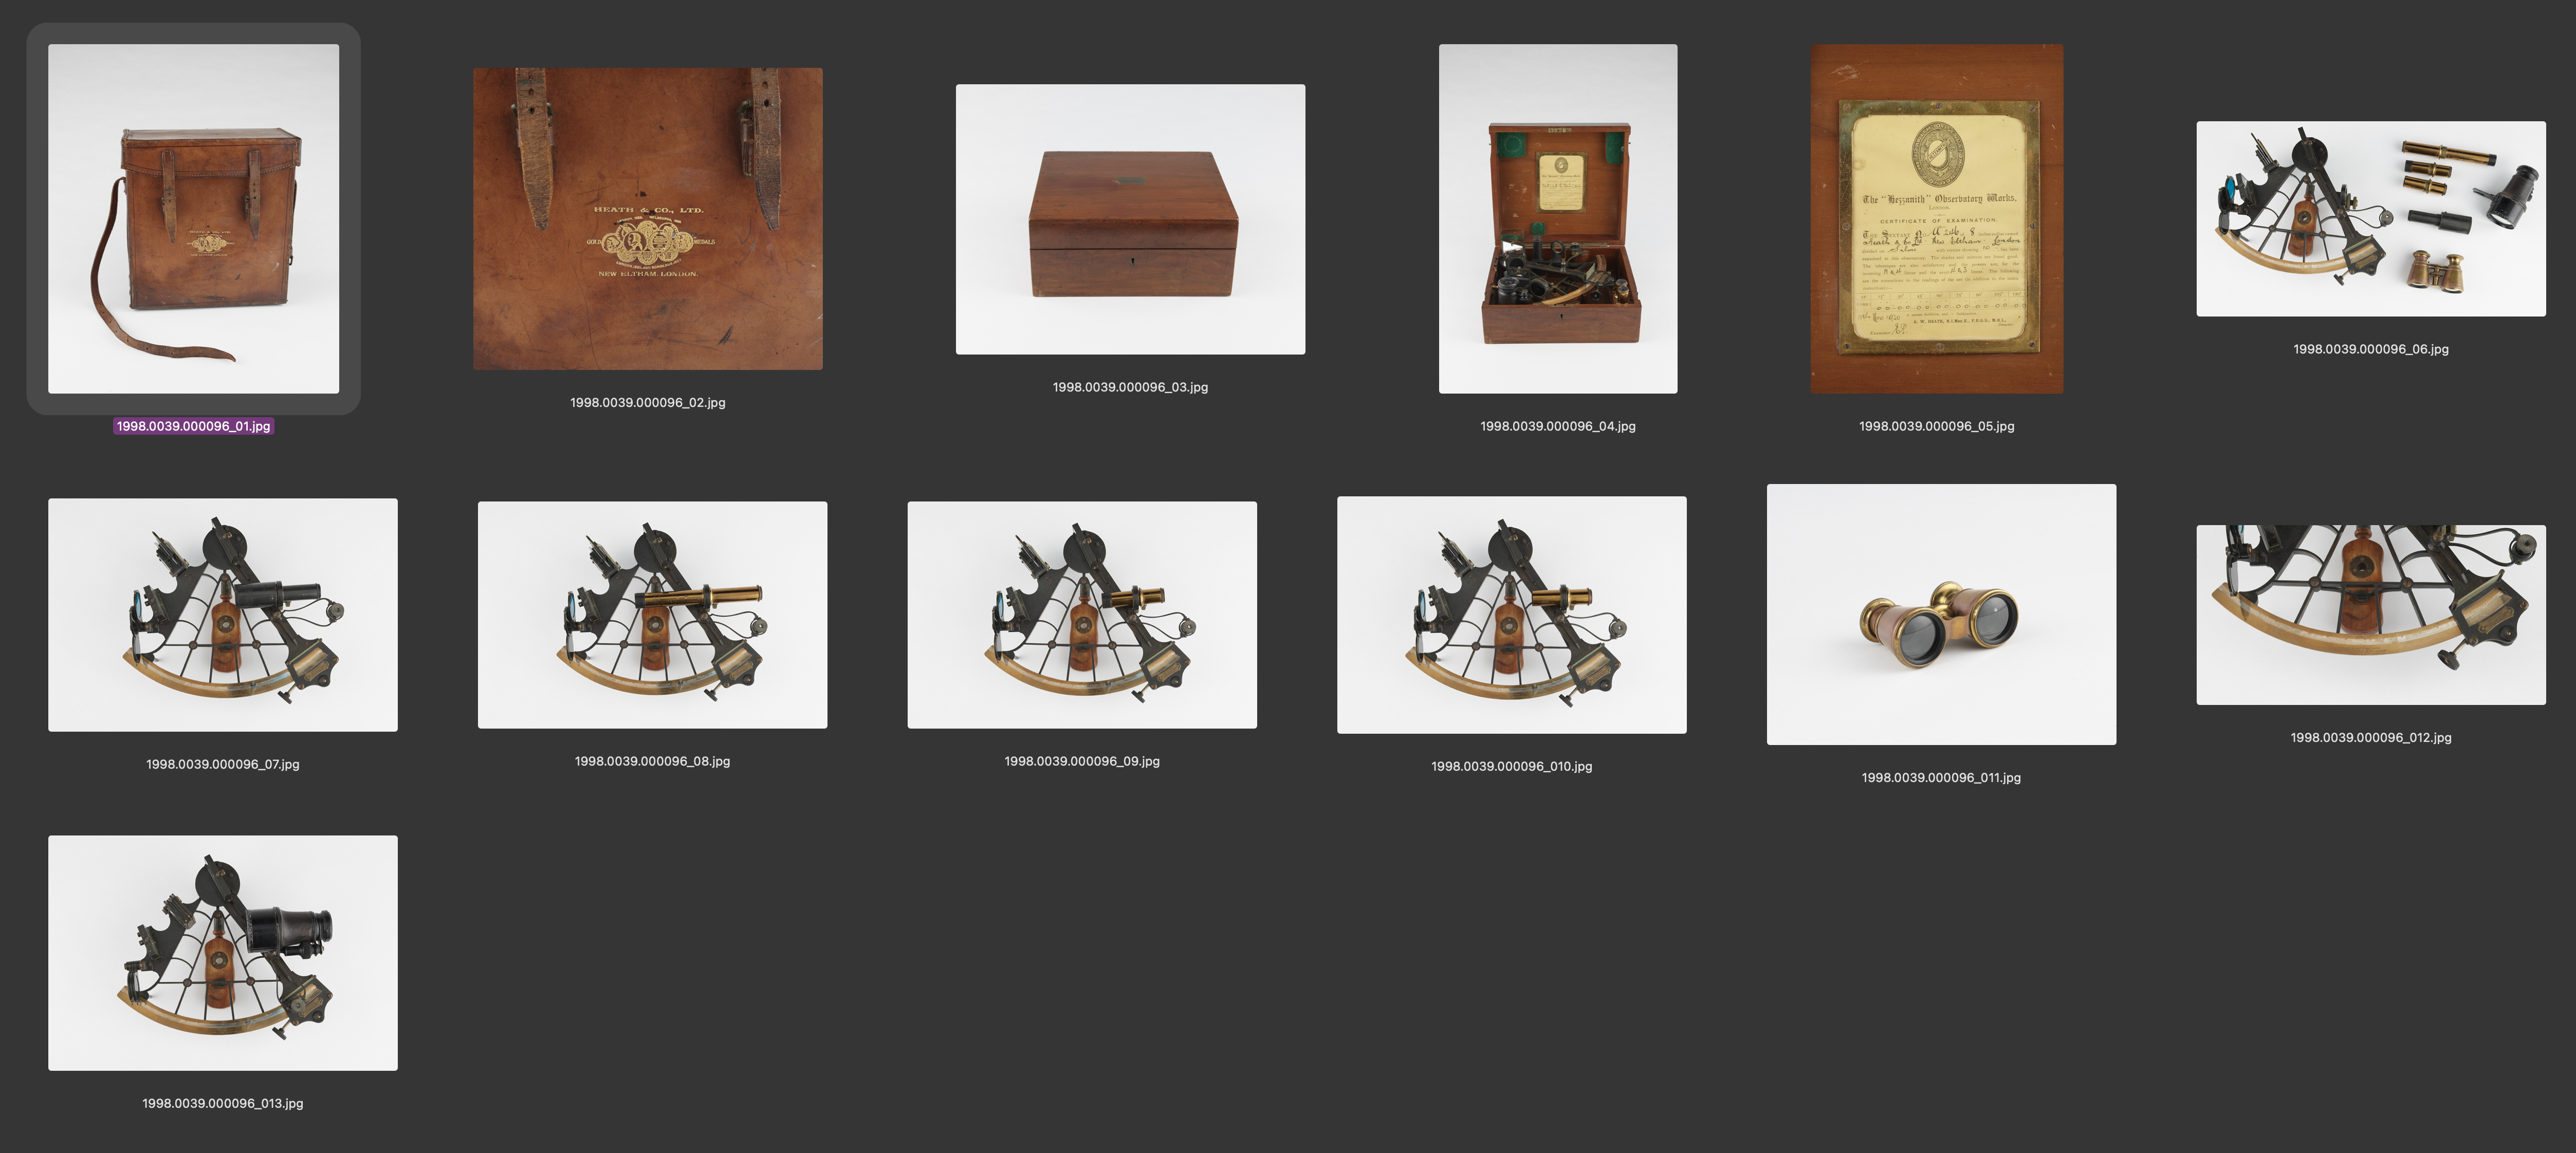 This screenshot shows how many images some instruments require to be thoroughly documented. Not only did we photograph the object with each attachment mounted, but we also photographed the leather case, details of inscriptions, the box, and any other notable components.